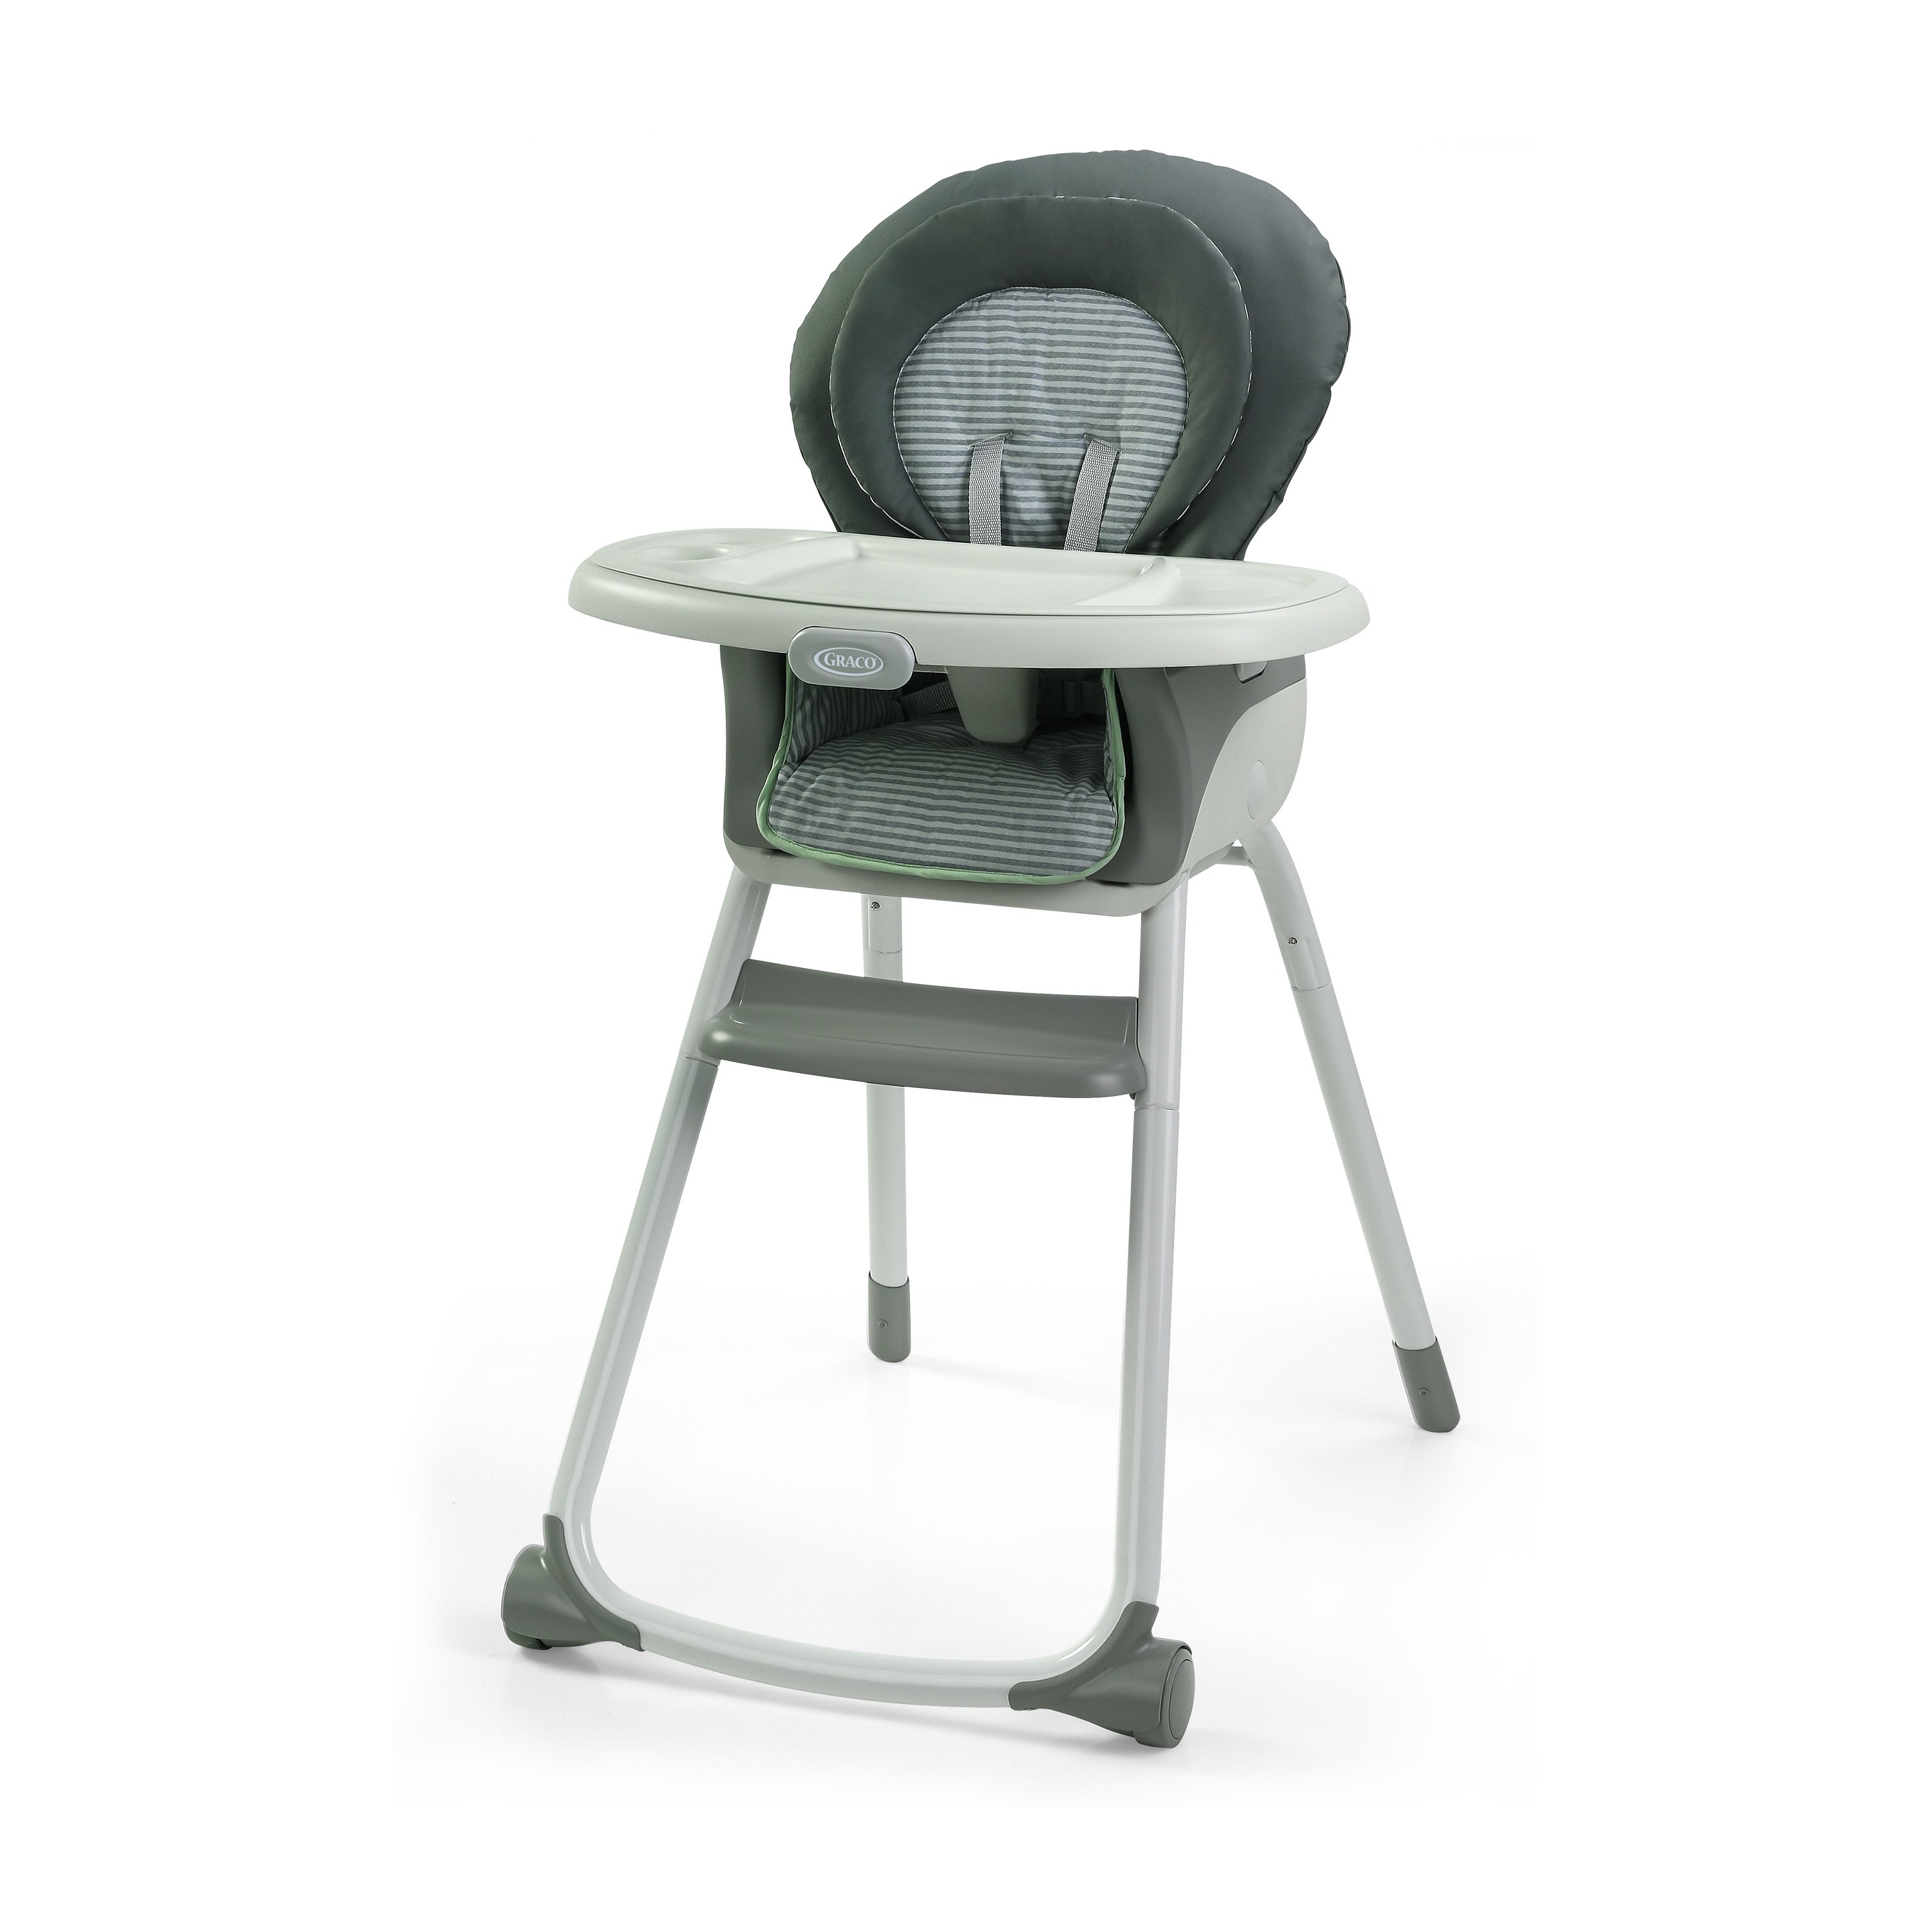 6 in 1 graco high chair